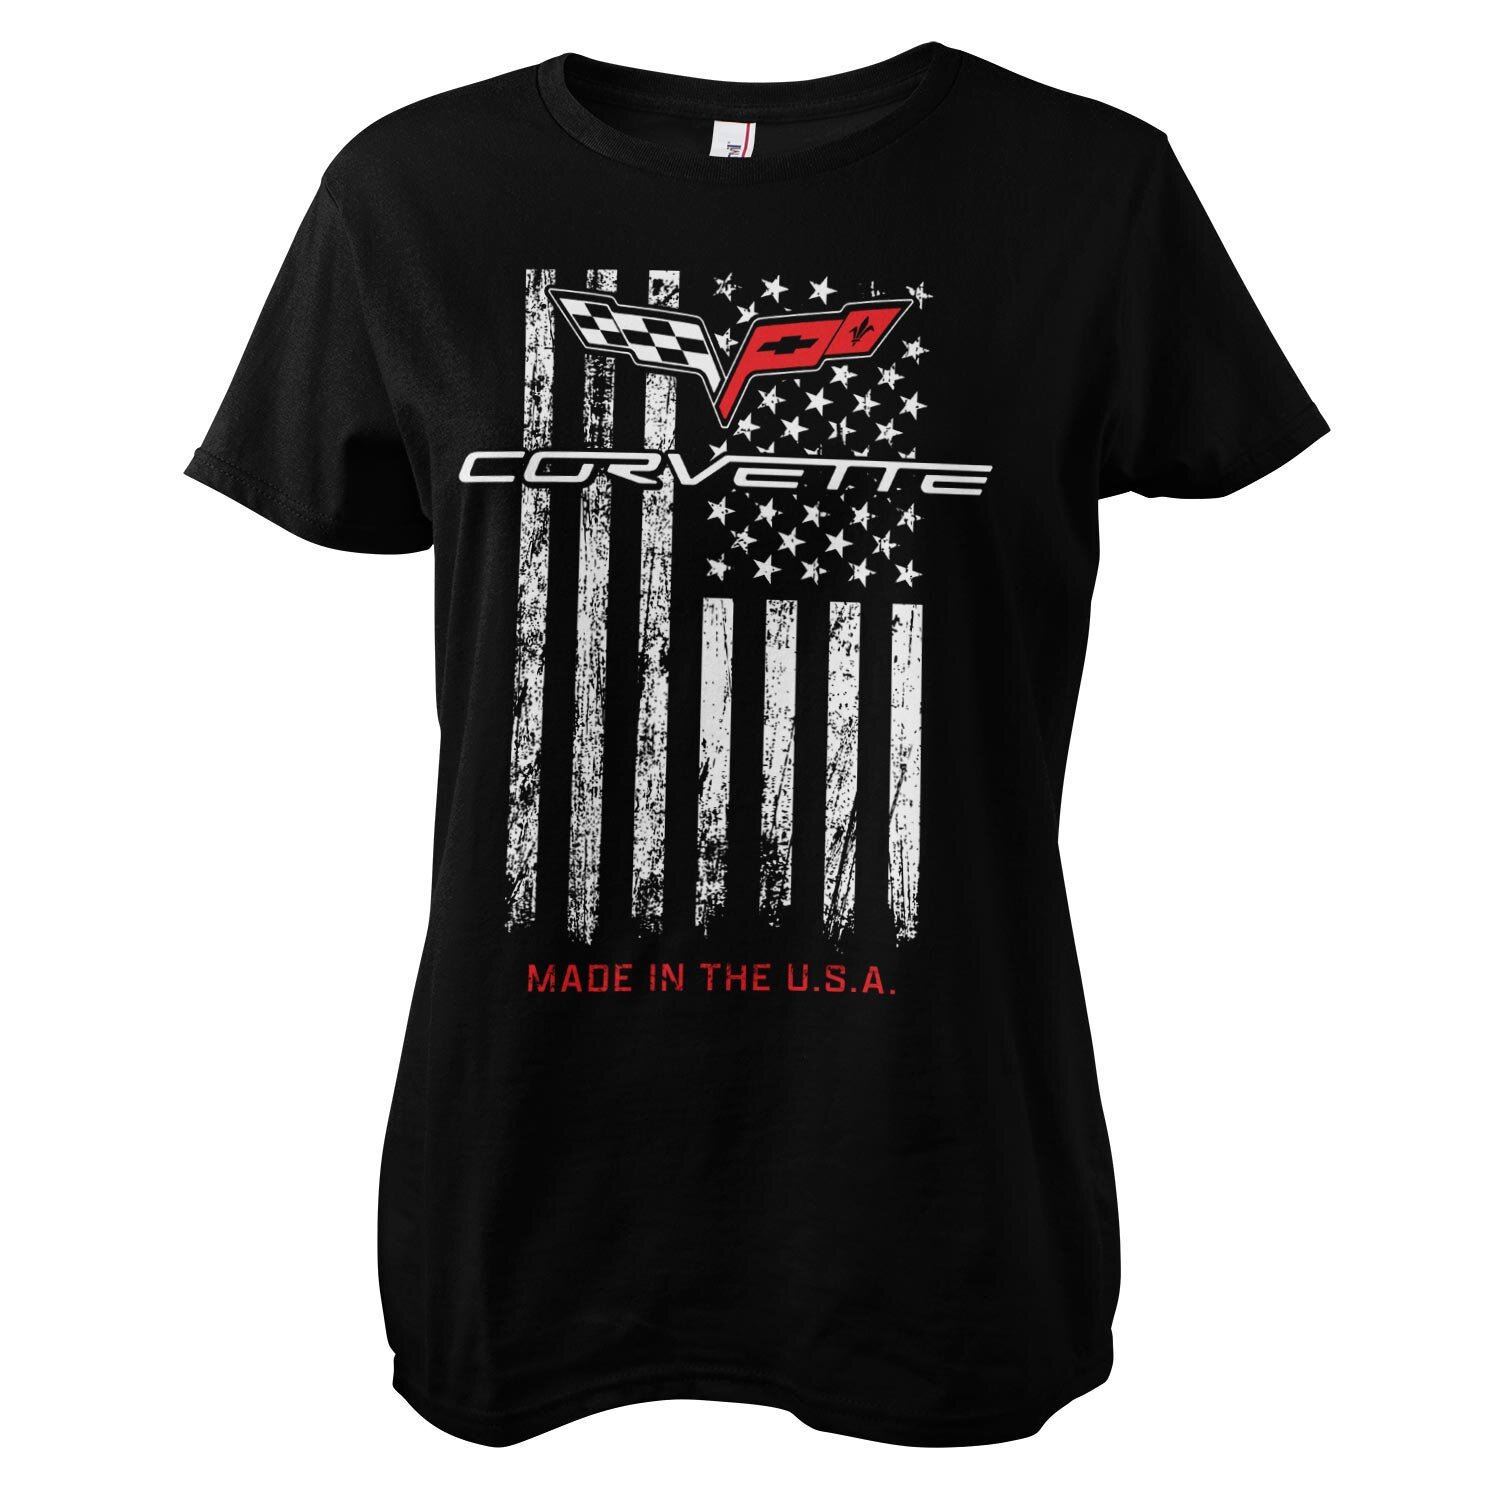 Corvette - Made In The USA Girly Tee